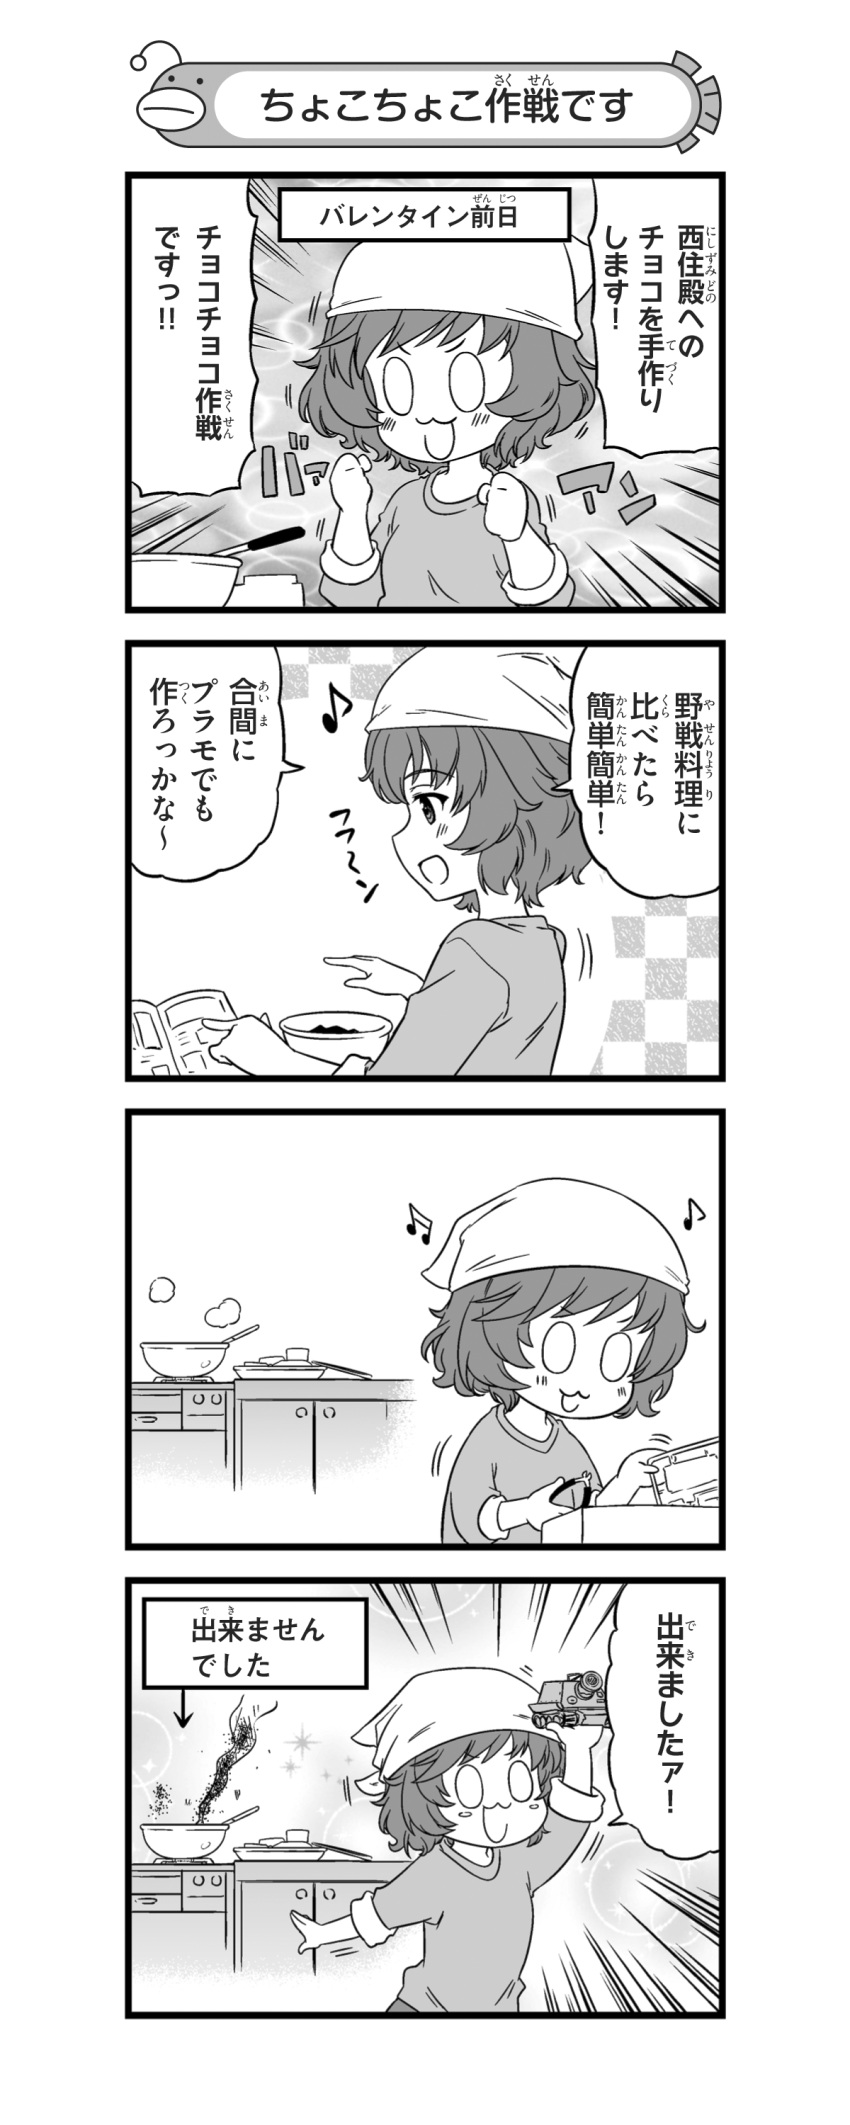 0_0 1girl 4koma :3 absurdres akiyama_yukari arm_up bandanna bangs beamed_semiquavers book bowl checkered checkered_background clenched_hand comic cooking emphasis_lines eyebrows_visible_through_hair girls_und_panzer greyscale headwear highres holding long_sleeves messy_hair model_tank monochrome musical_note nanashiro_gorou official_art open_mouth pdf_available plate quaver shirt short_hair sleeves_rolled_up smile smoke solo standing stove sturmtiger tweezers v-shaped_eyebrows